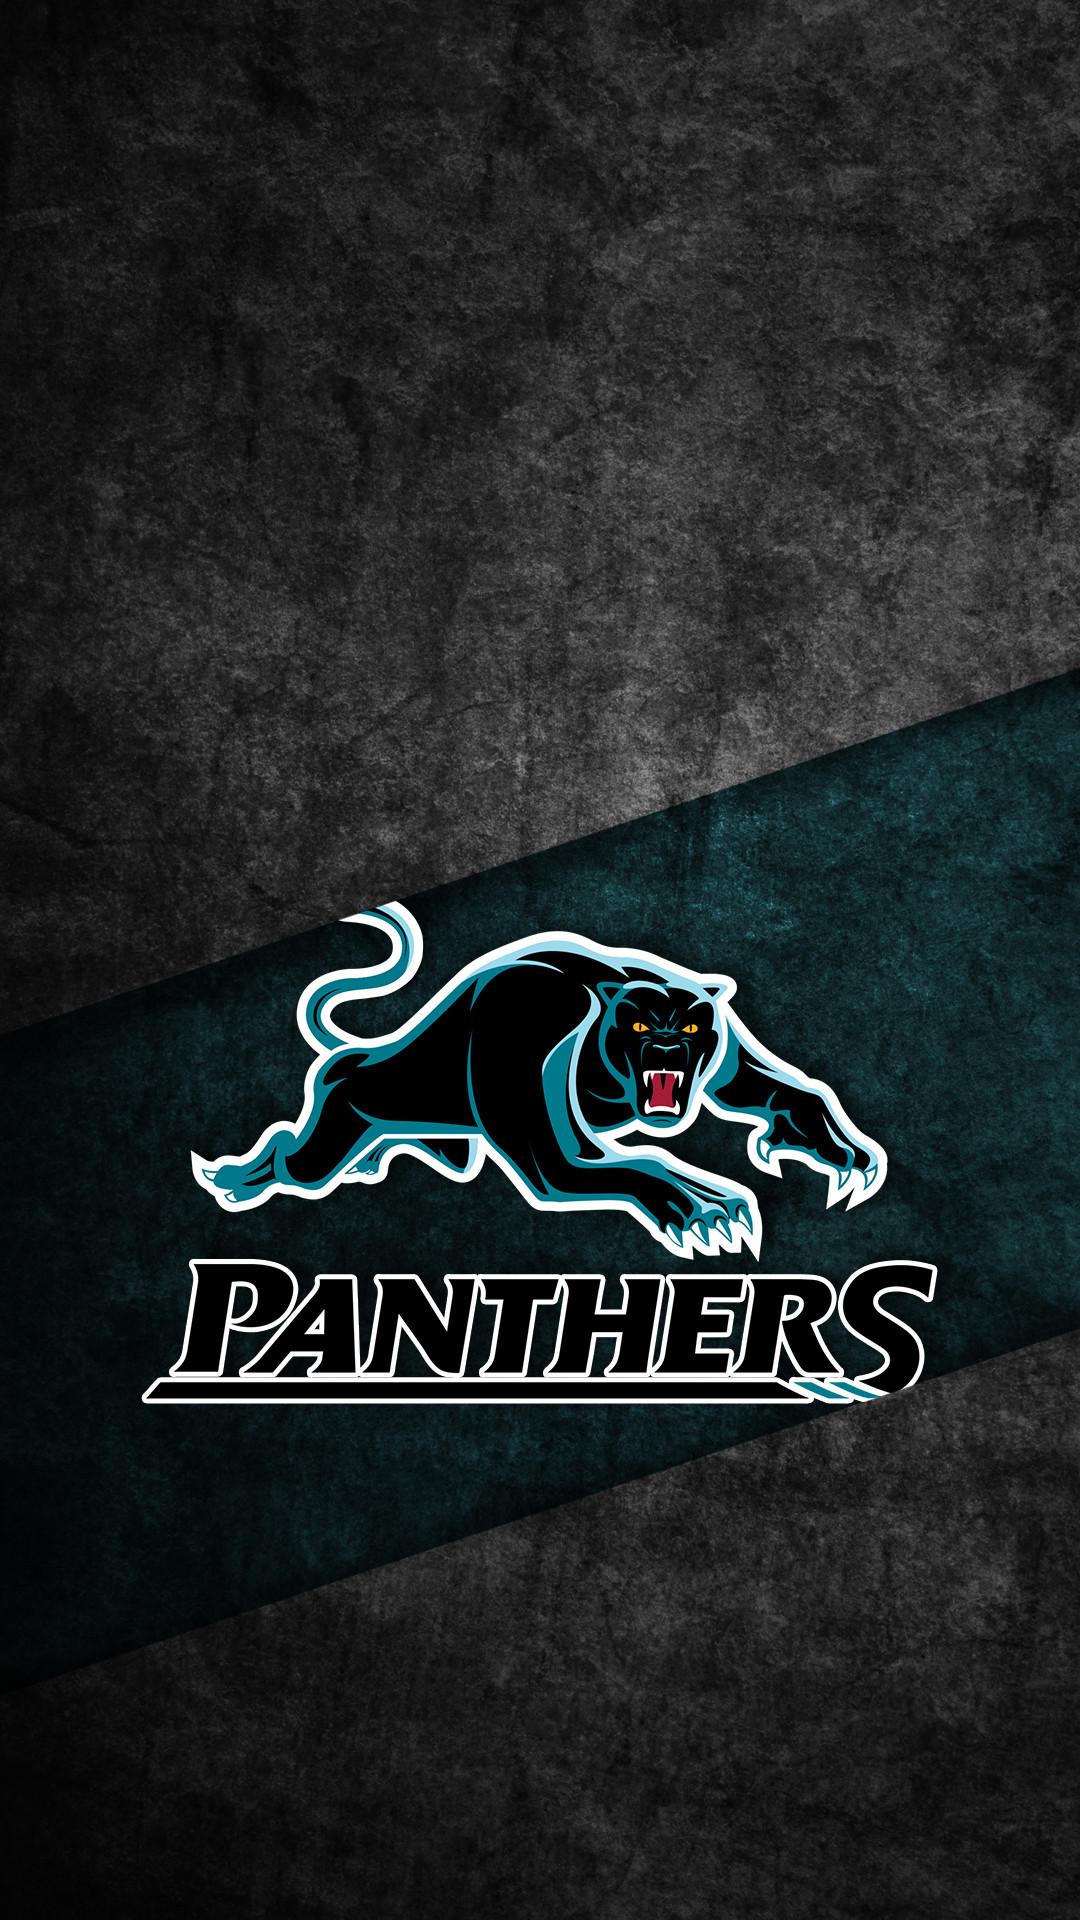 Panthers Wallpaper Iphone